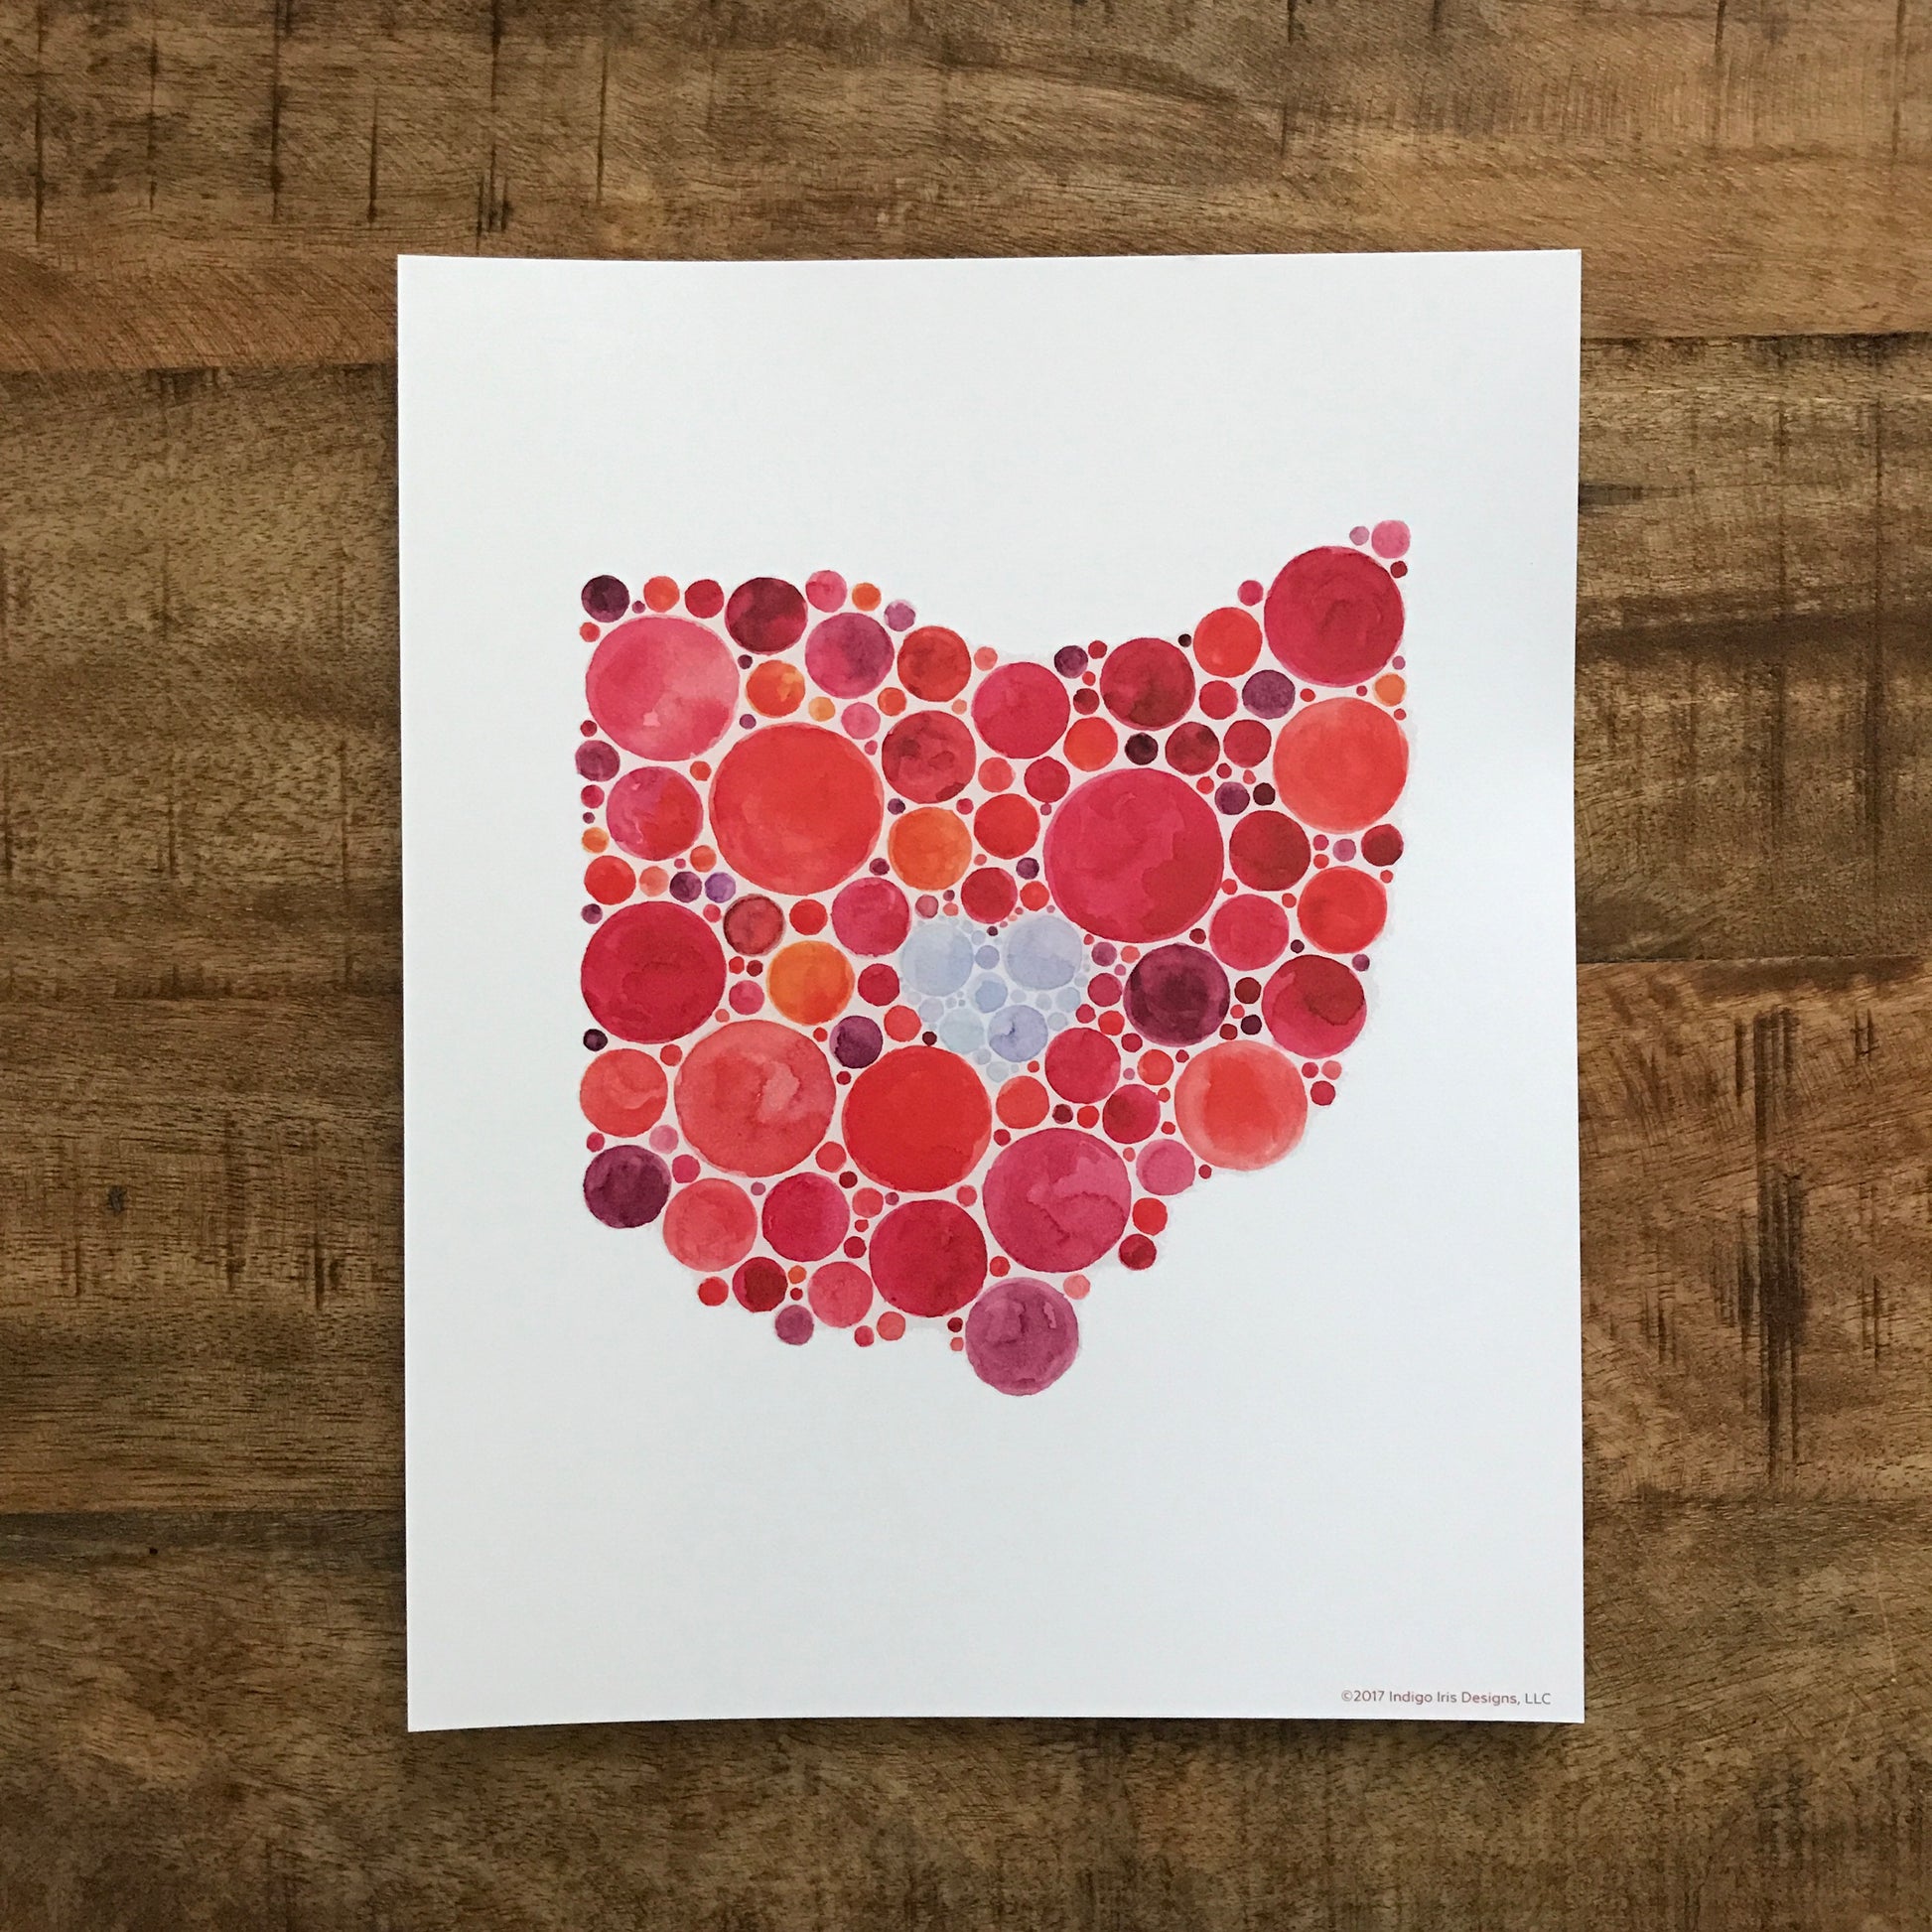 A print showing the state of Ohio done in the style of an ishihara color vision test.